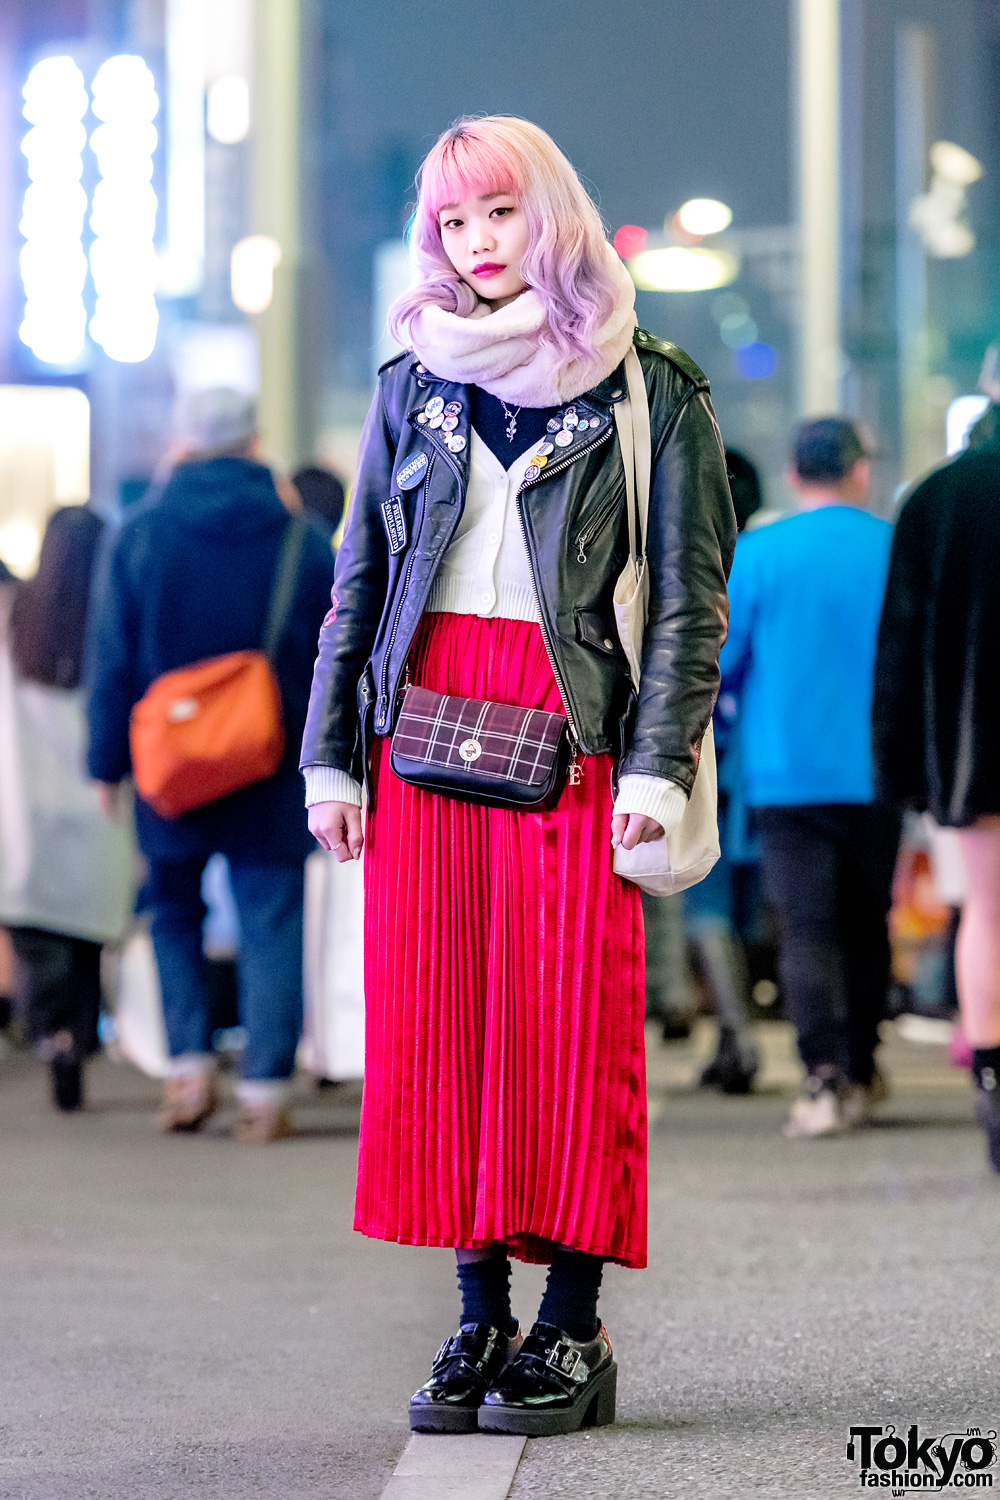 Elleanor in Harajuku w/ Schott Leather Jacket, WC Pleated Maxi Skirt & Fred Perry Bag